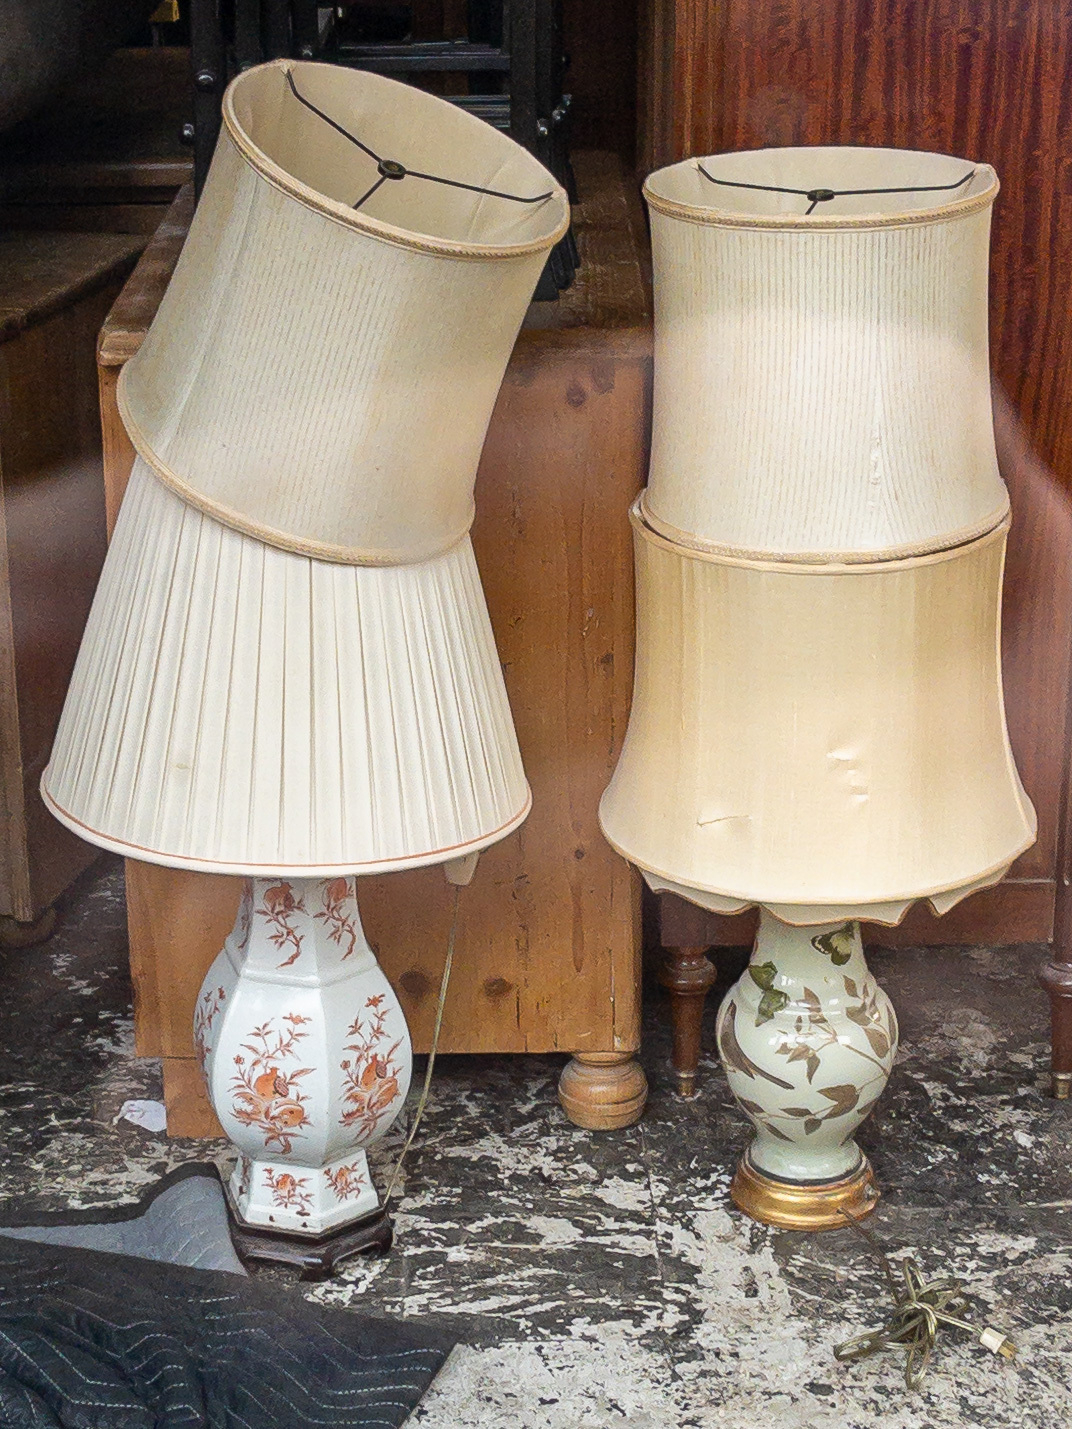 Two antique lamp bases, each with a lamp shade attached and second lamp shade piled on top.